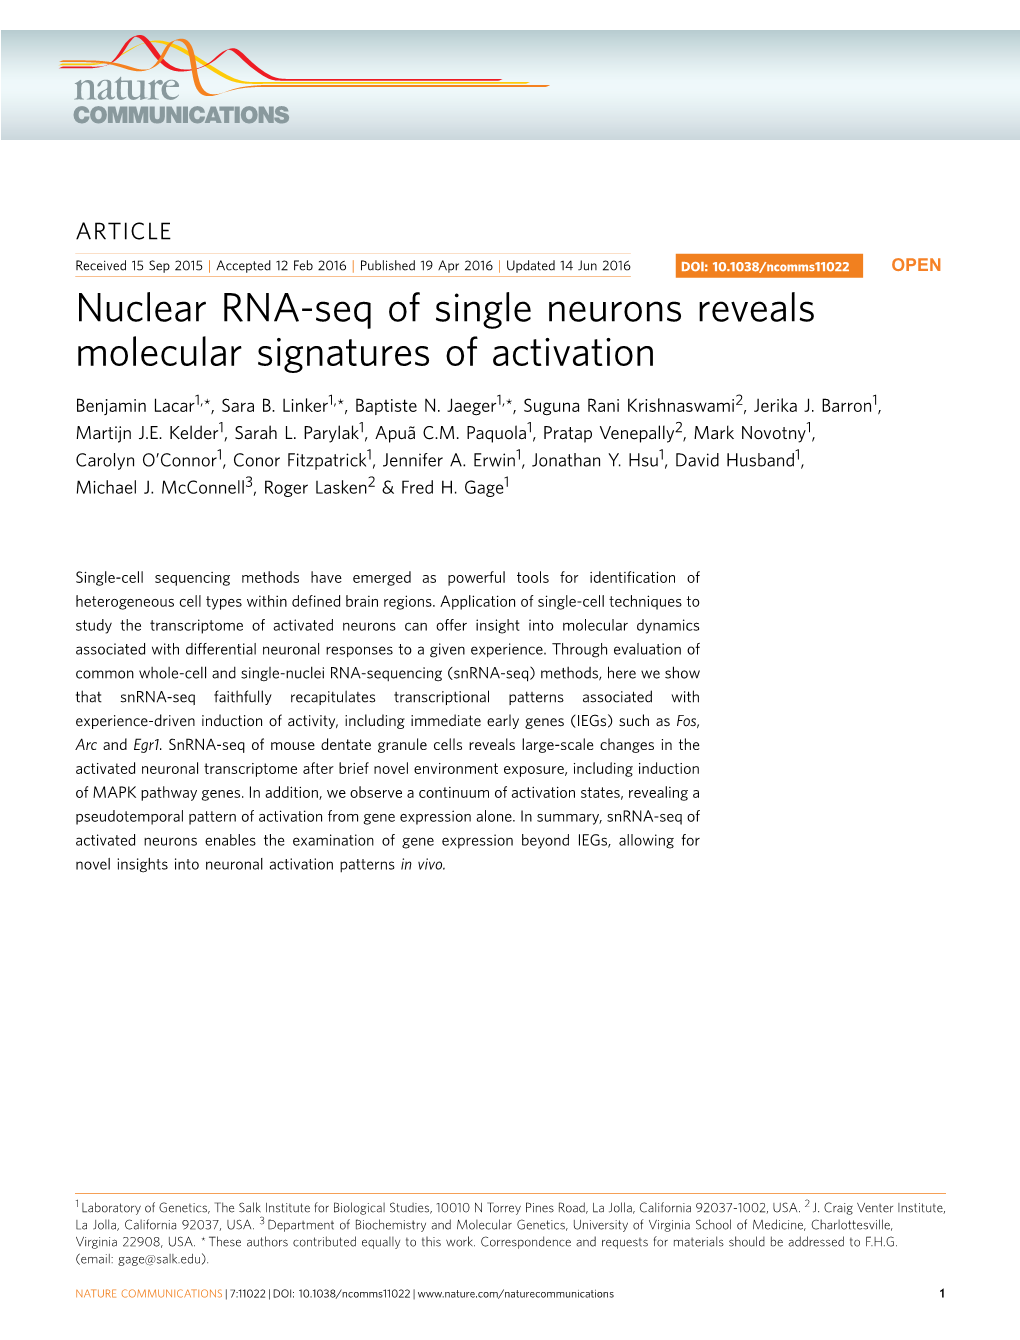 Nuclear RNA-Seq of Single Neurons Reveals Molecular Signatures of Activation